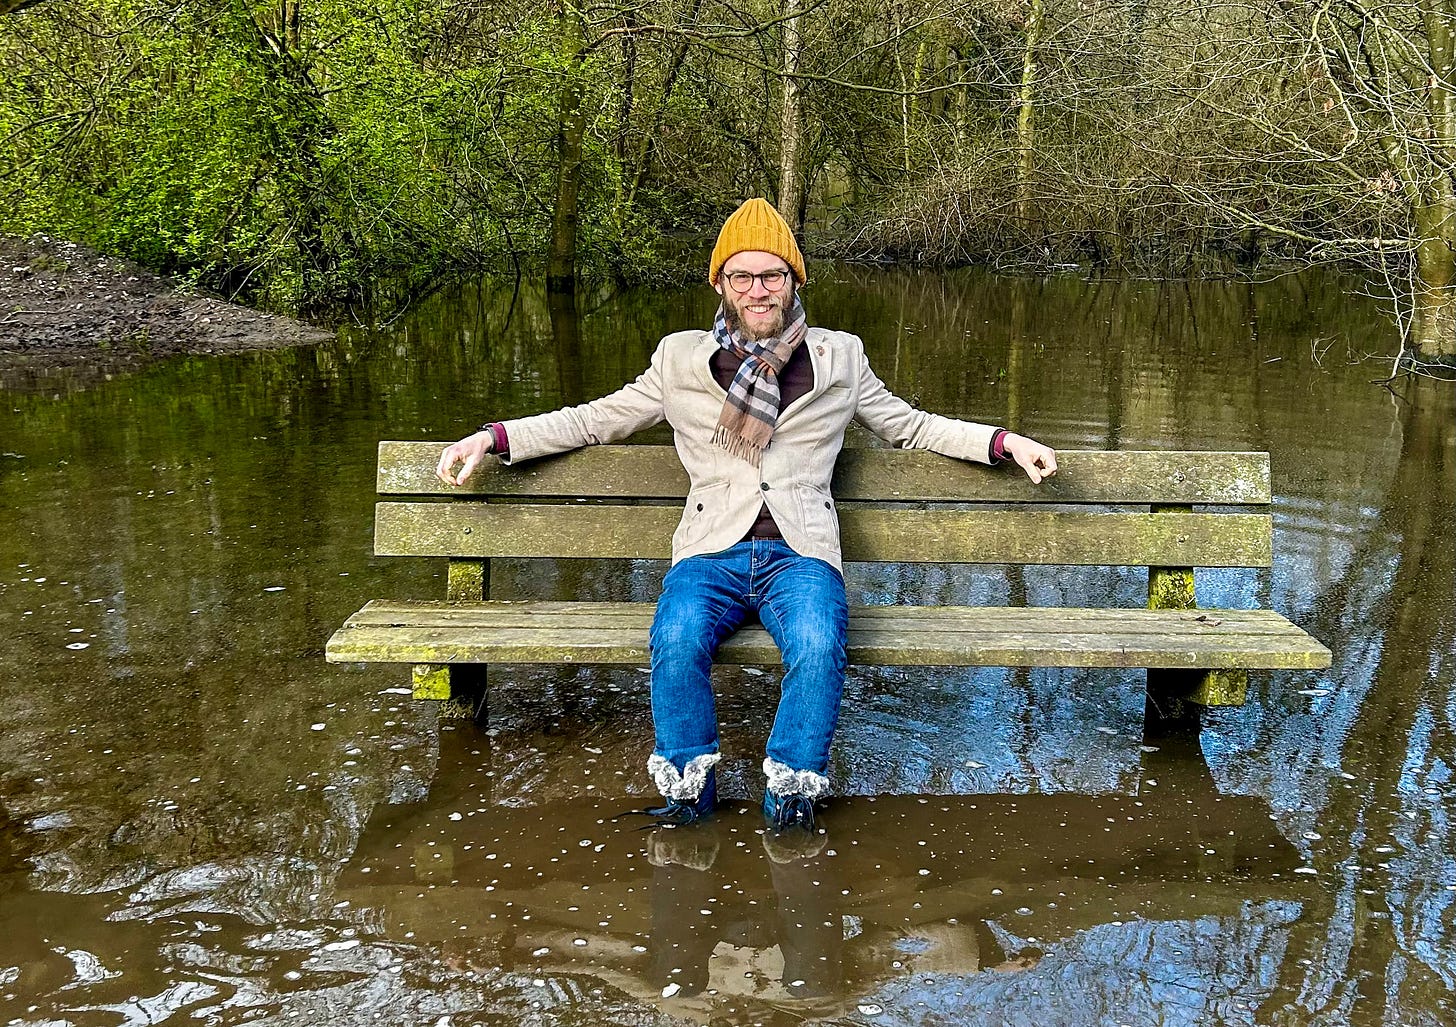 Adsum sitting on a bench, boot-deep in floodwater